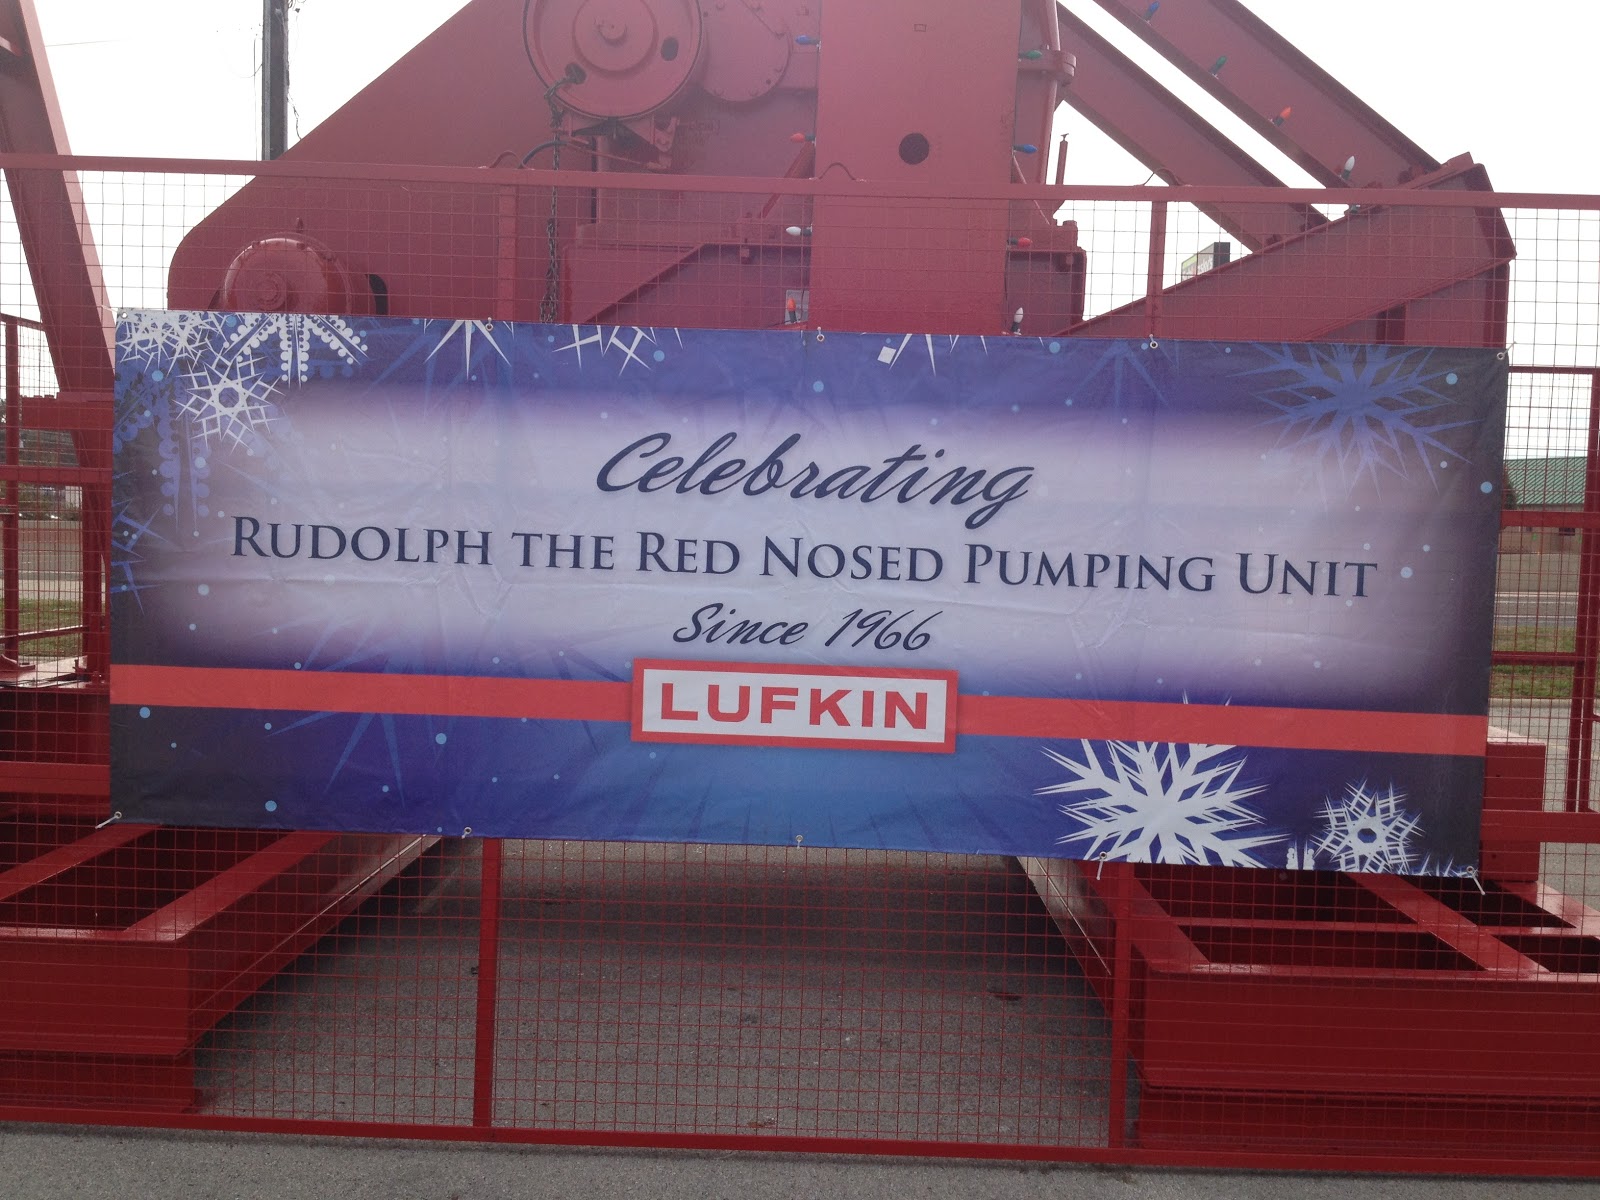 Rudolph the Red Nose Oil Pumping Equipment, Lufkin, TX - 180 OUT